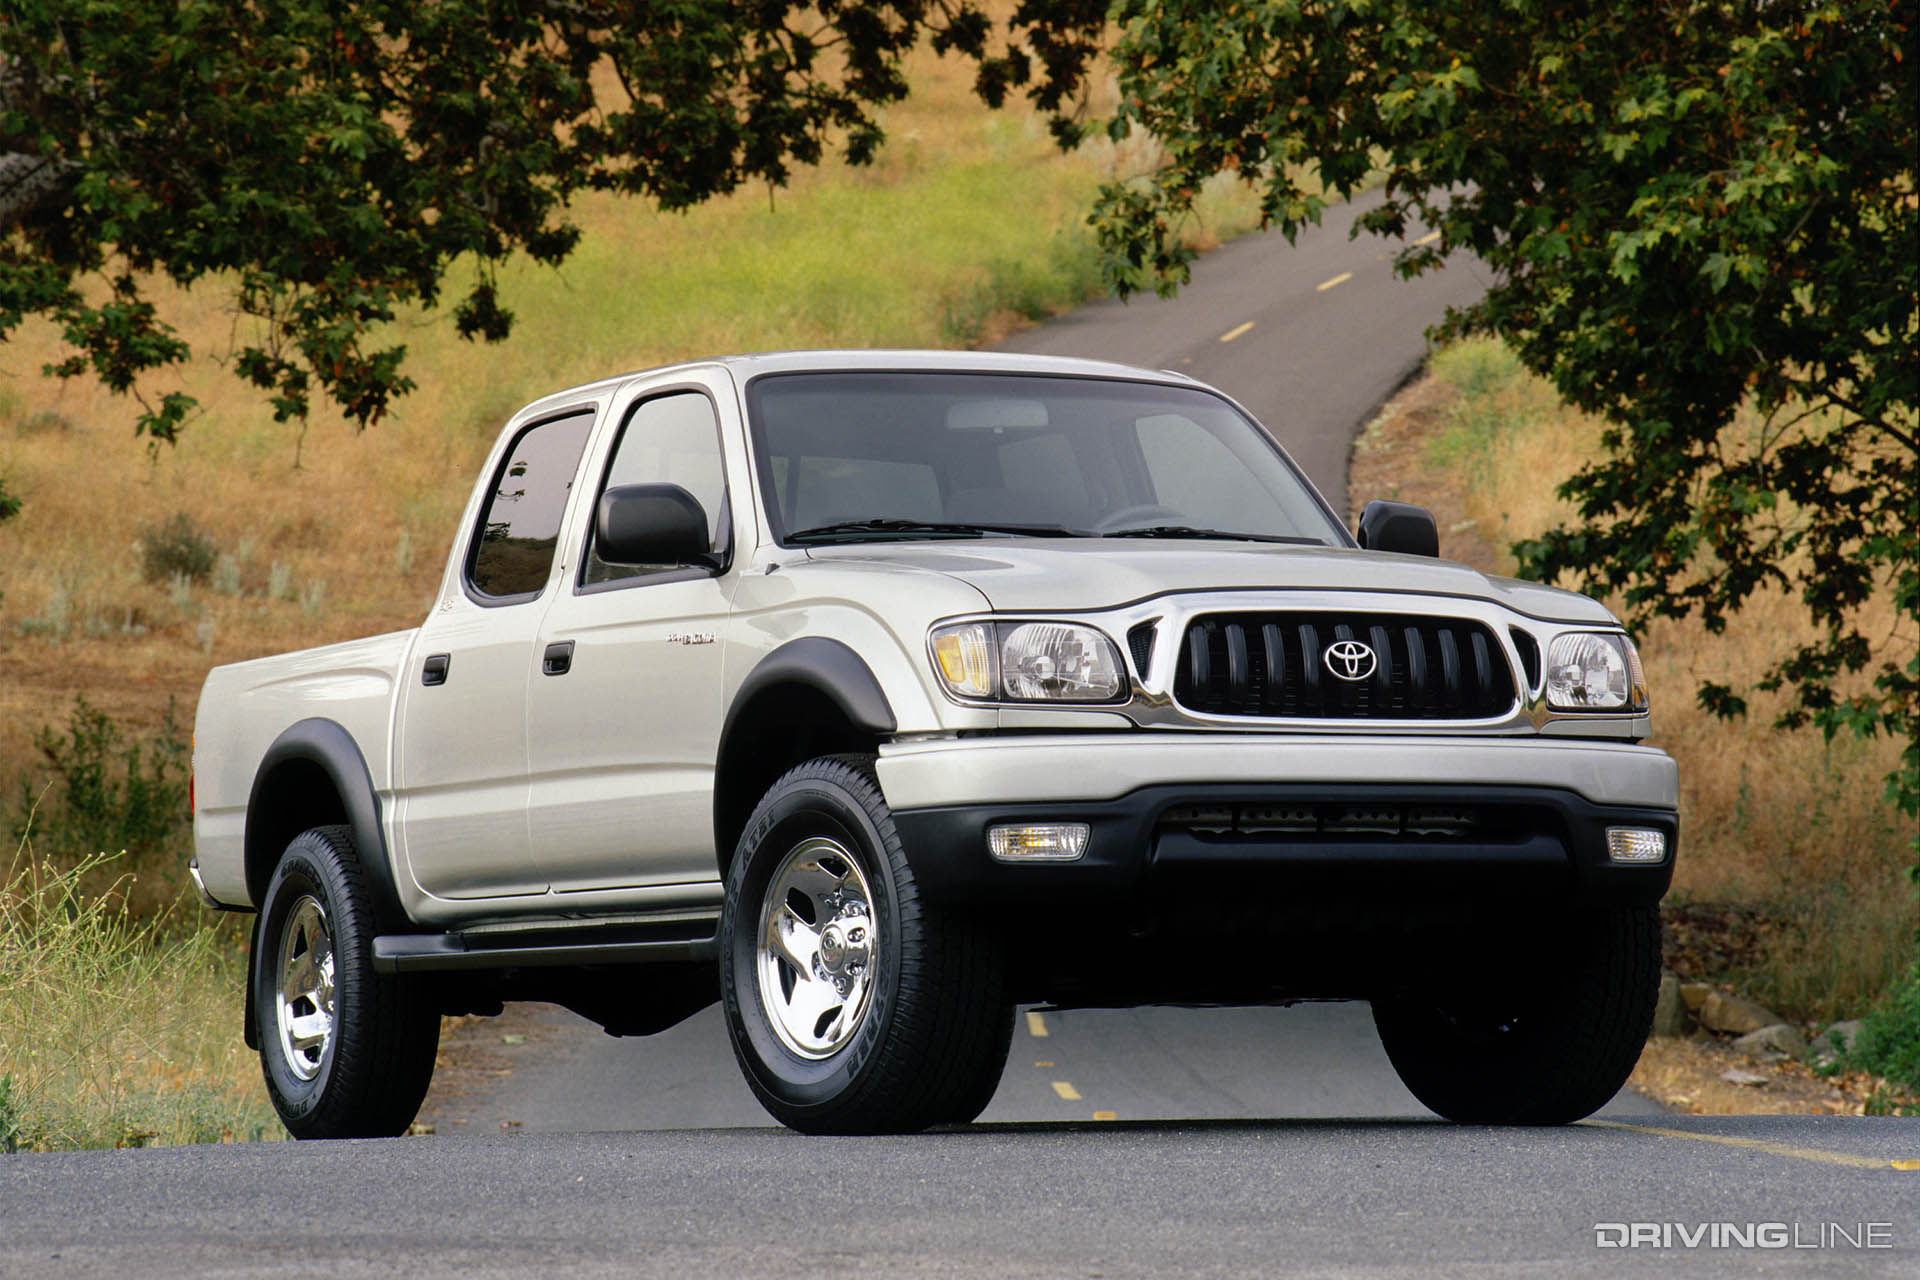 25 Years of Tacoma: The Origins & Evolution of Toyota's Iconic Pickup